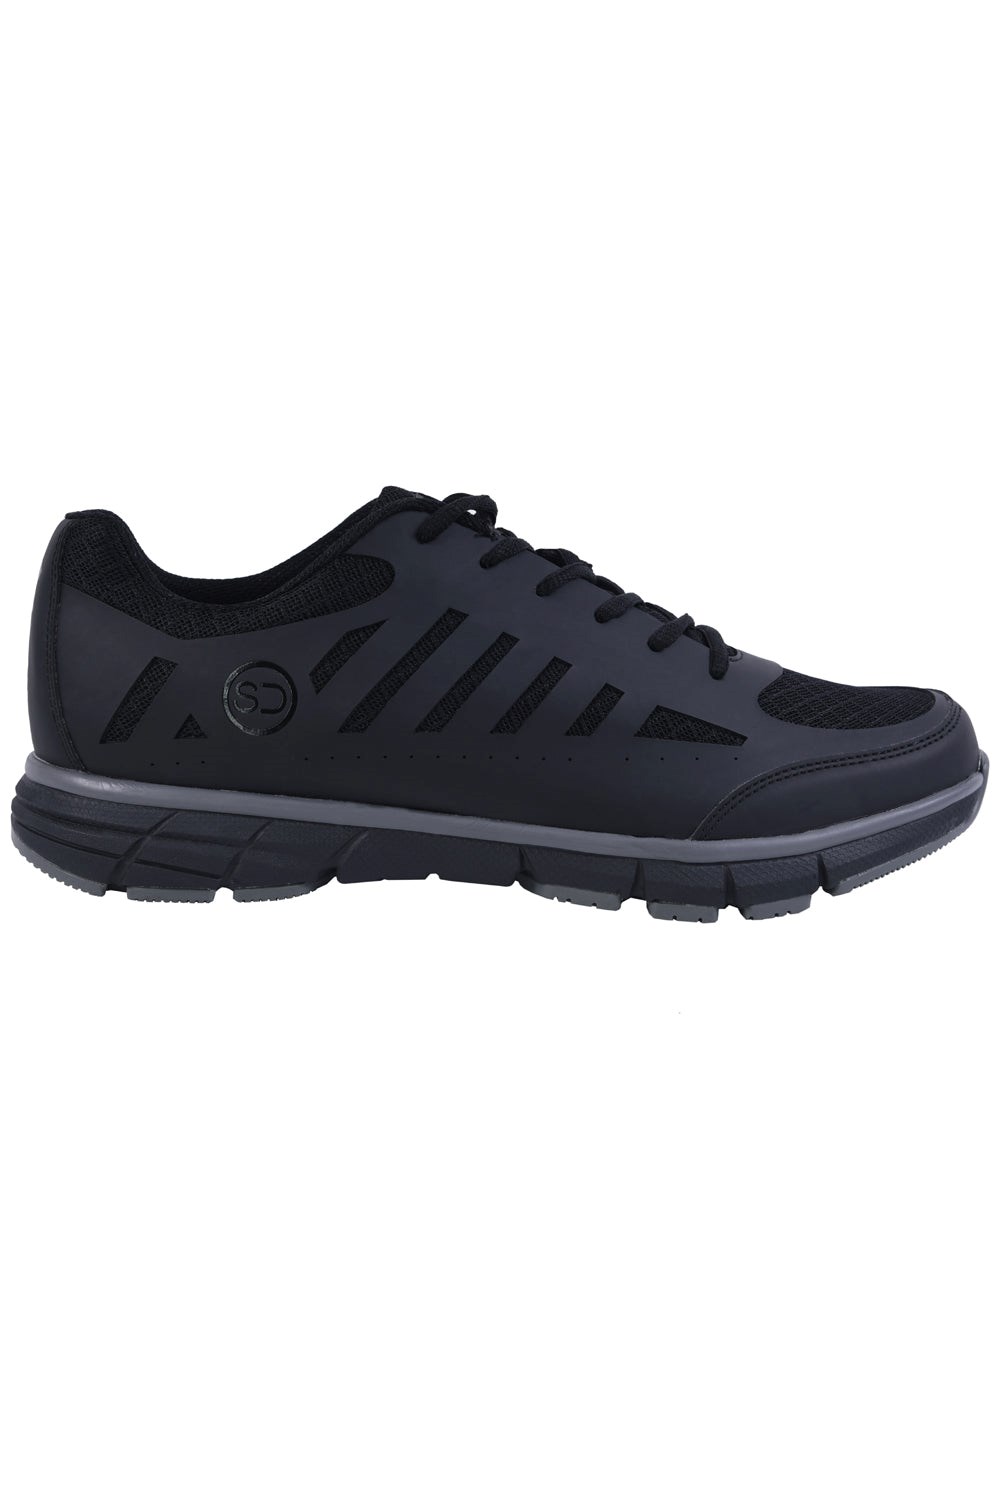 S-I1 Mens Indoor City Spin Cycle Shoes -